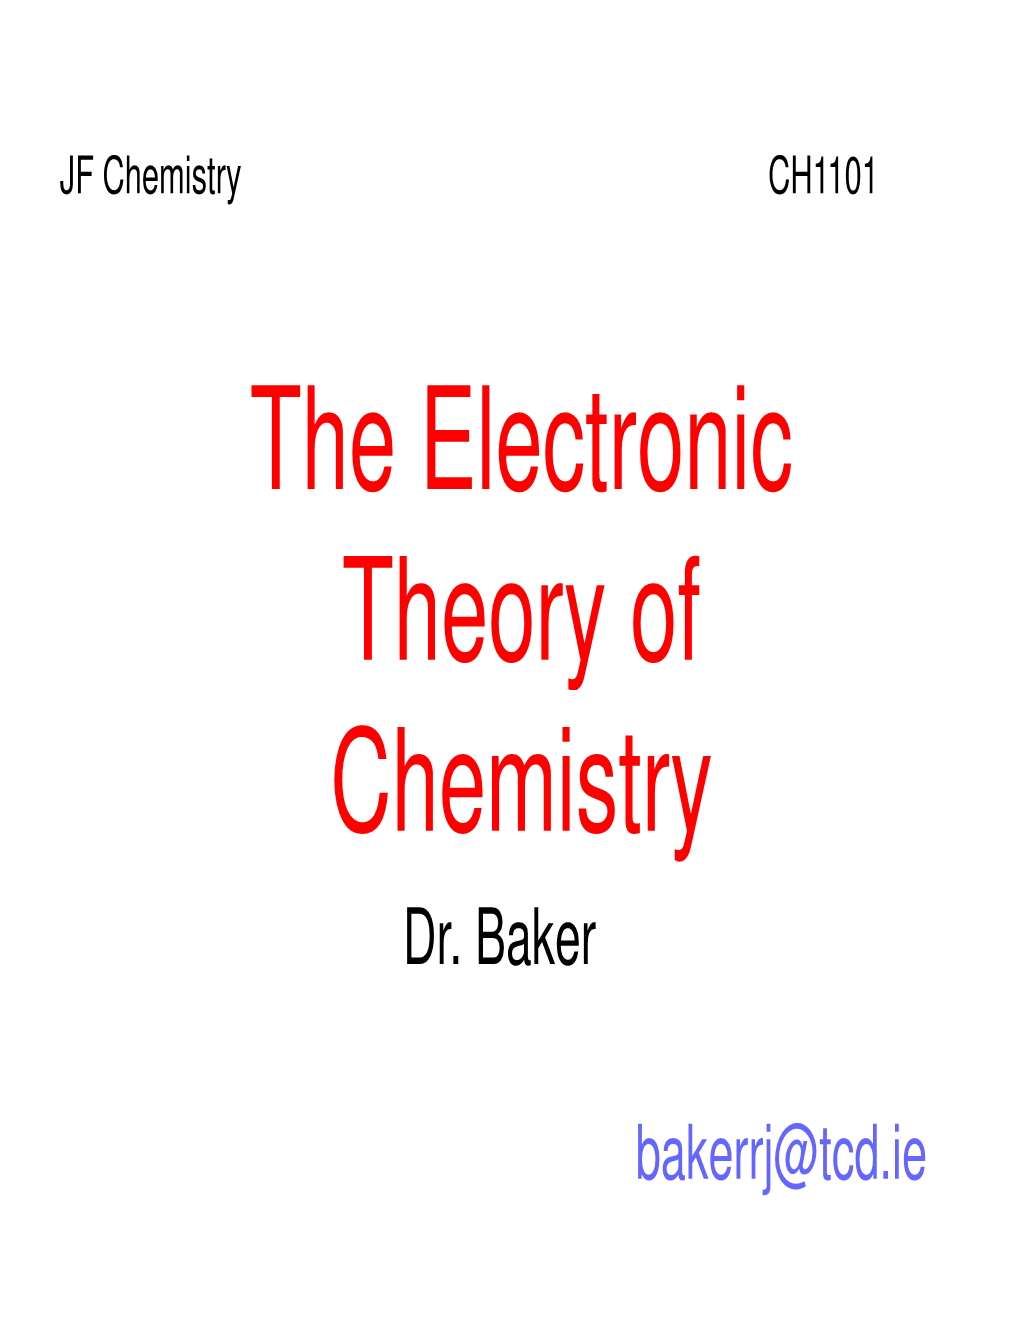 The Electronic Theory of Theory of Chemistry